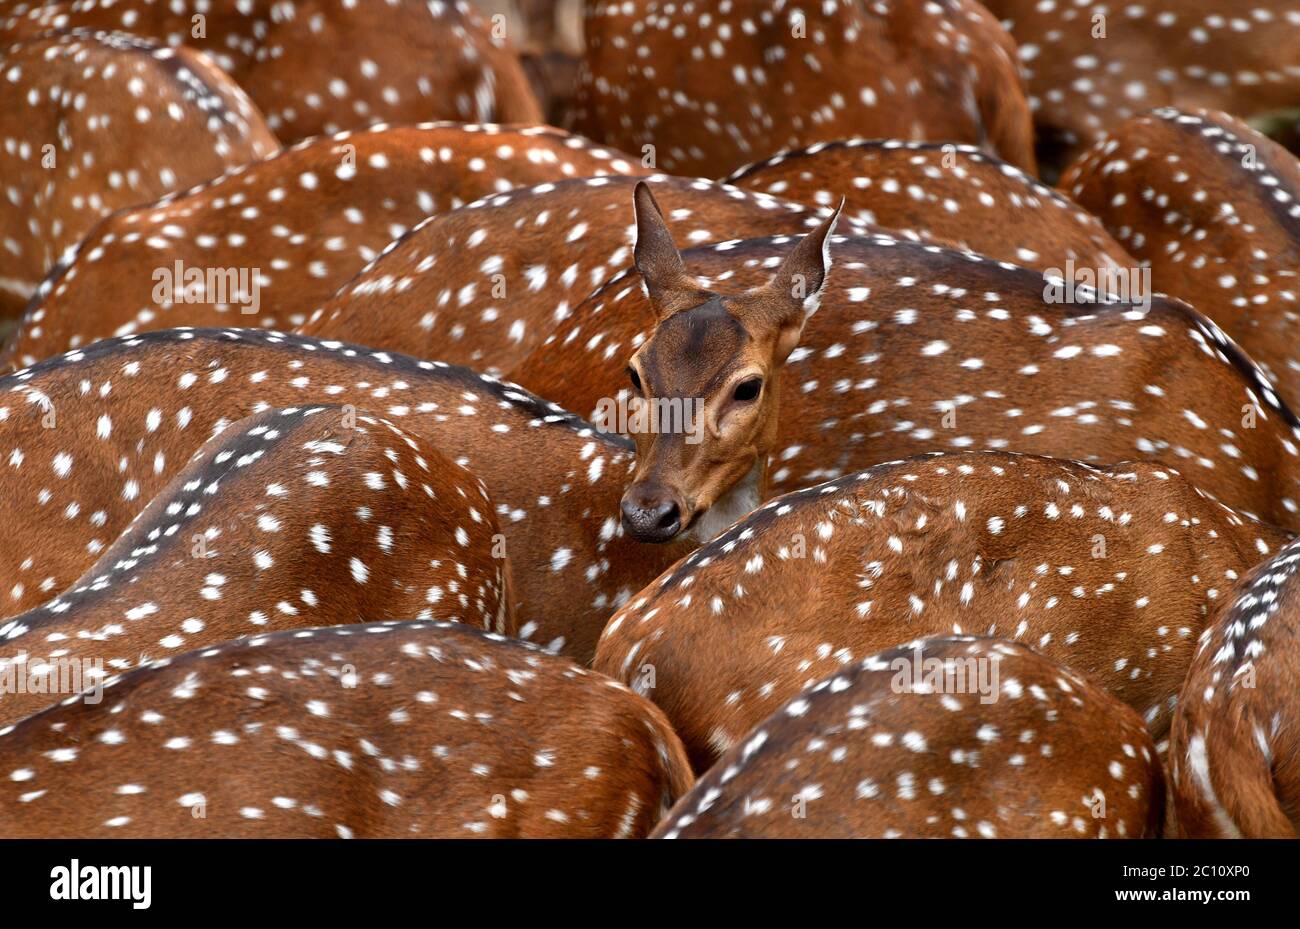 Herd of Spotted deer or Chital, chital deer, axis deer. Beautiful group of spotted deer in a zoo park with White spots on golden-brown fur.Kerala Stock Photo